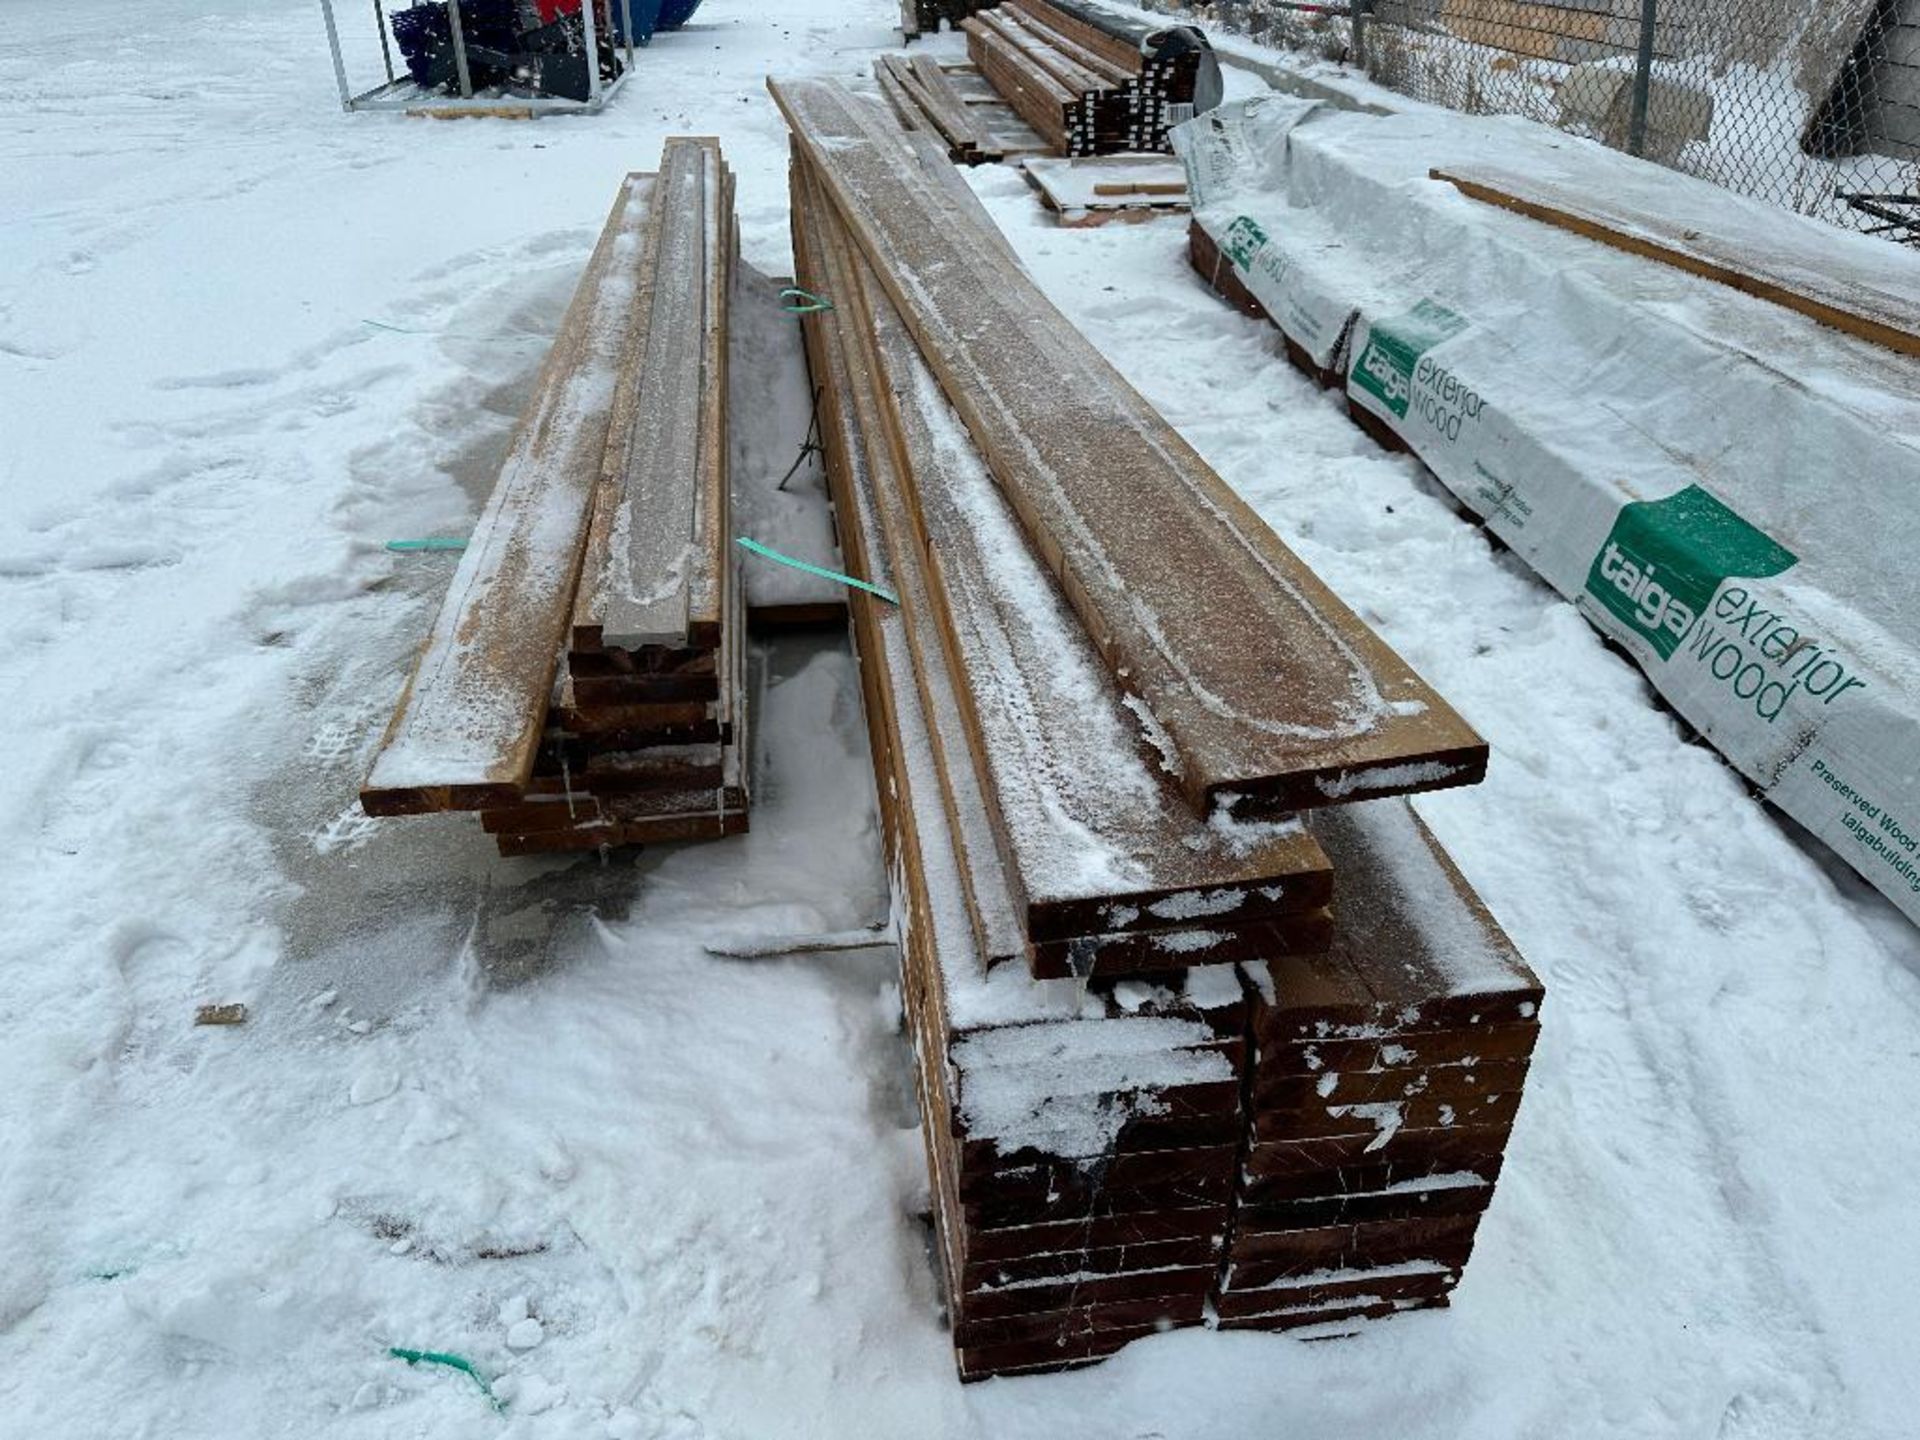 Lot of Asst. Lumber including (28) Asst. 2X10's and (18) 150" 2X8's - Image 2 of 5